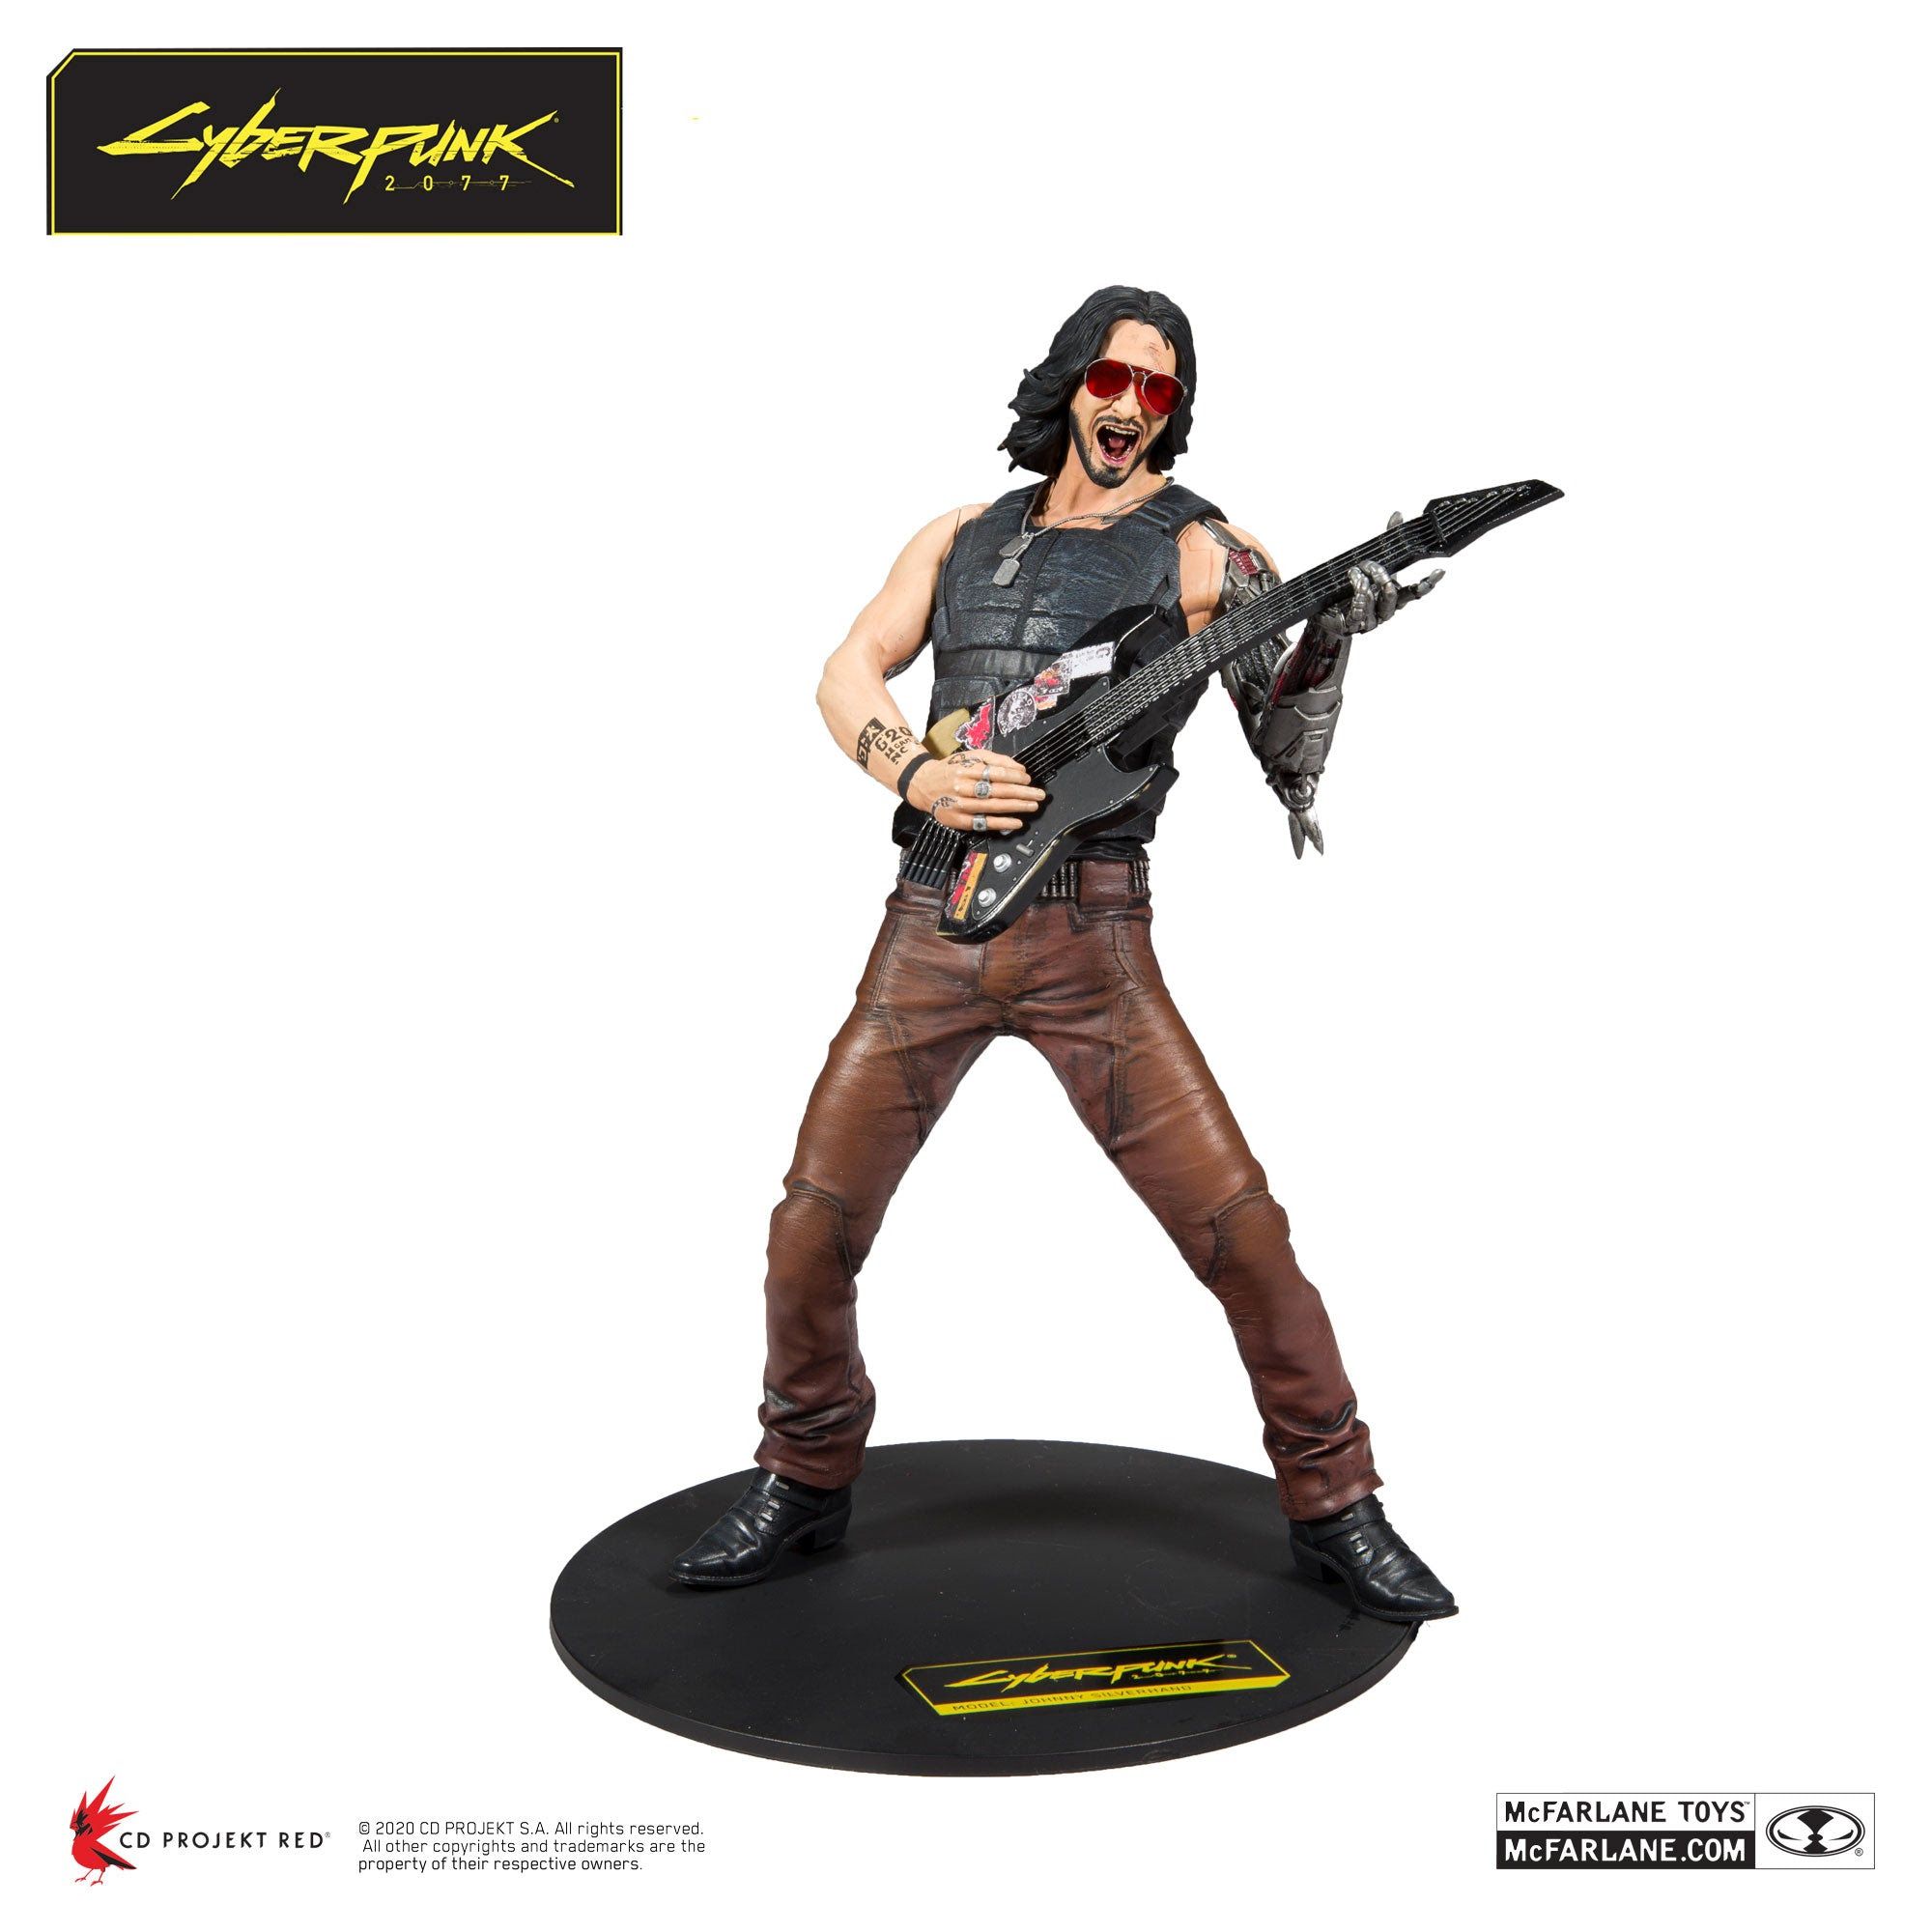 Image of Cyberpunk 2077 Johnny Silverhand 12" Action Figure - Q2 2020